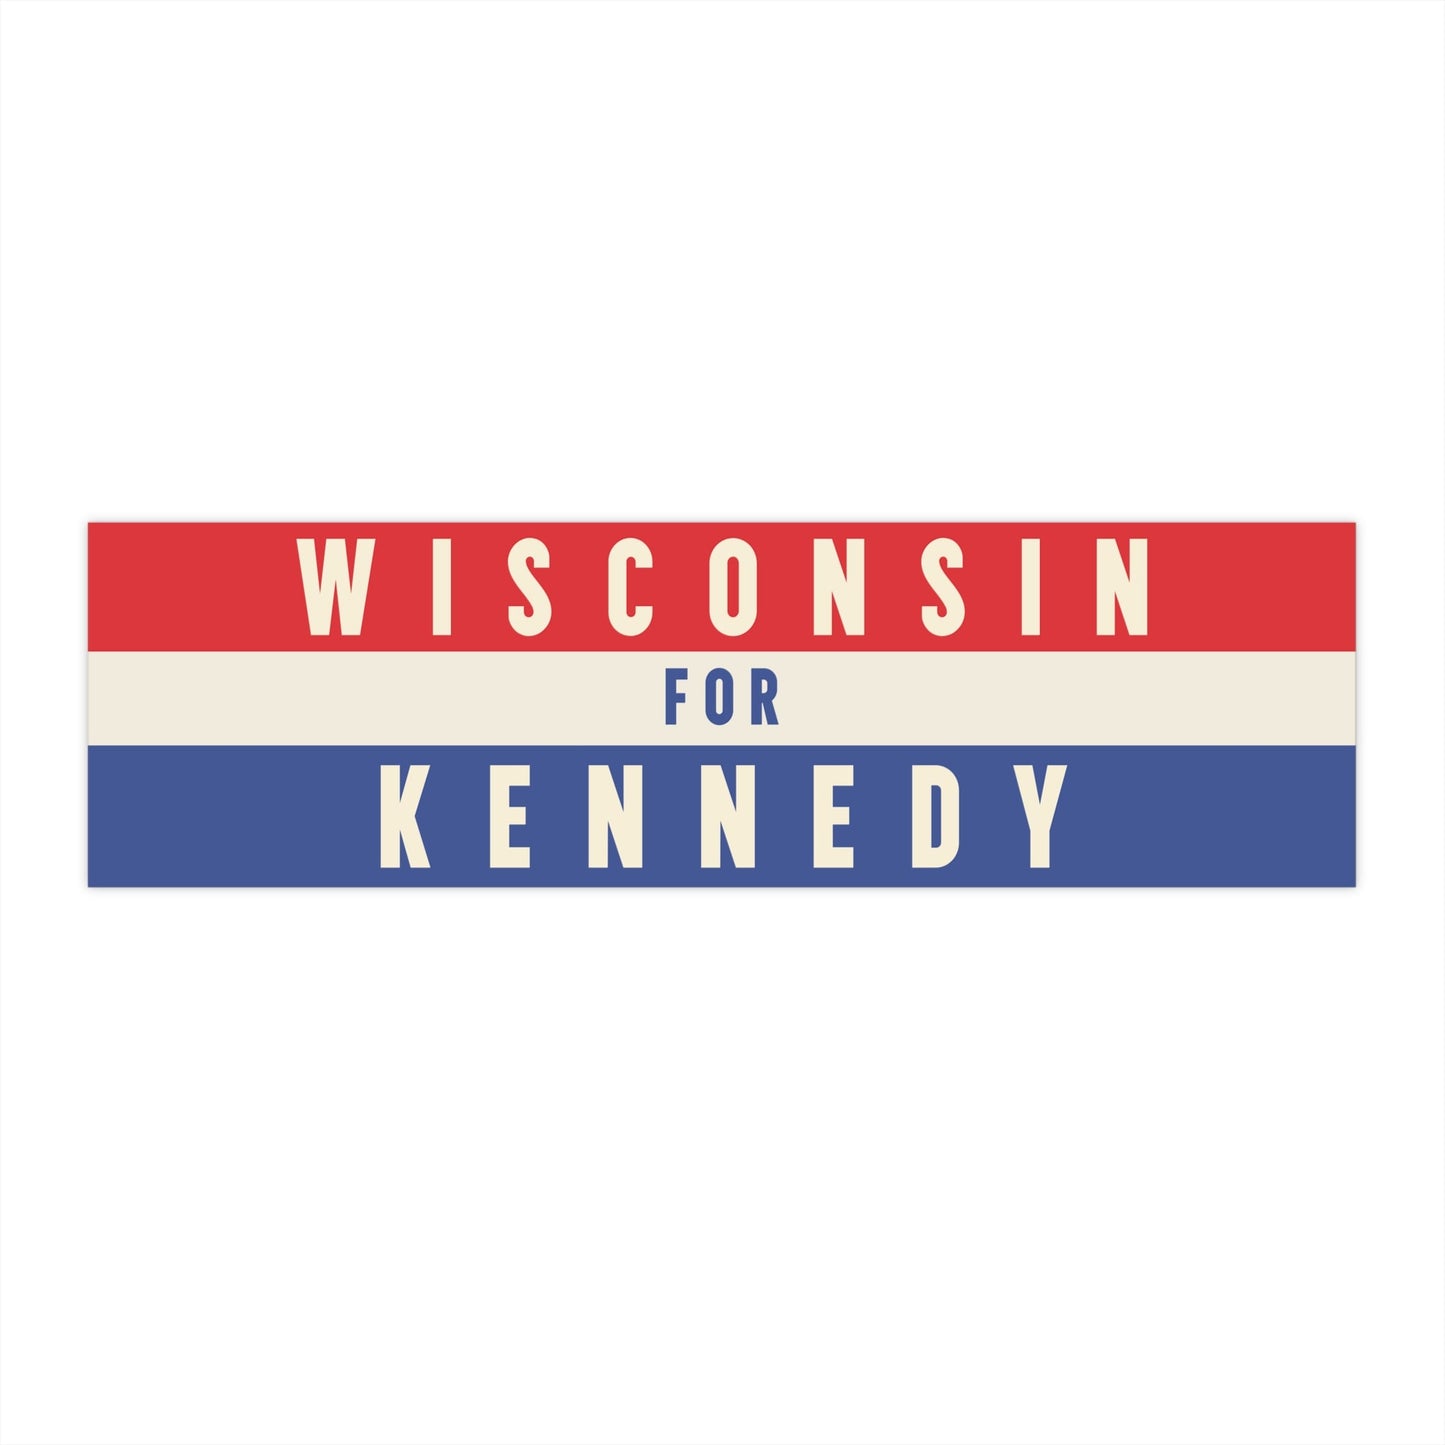 Wisconsin for Kennedy Bumper Sticker - TEAM KENNEDY. All rights reserved